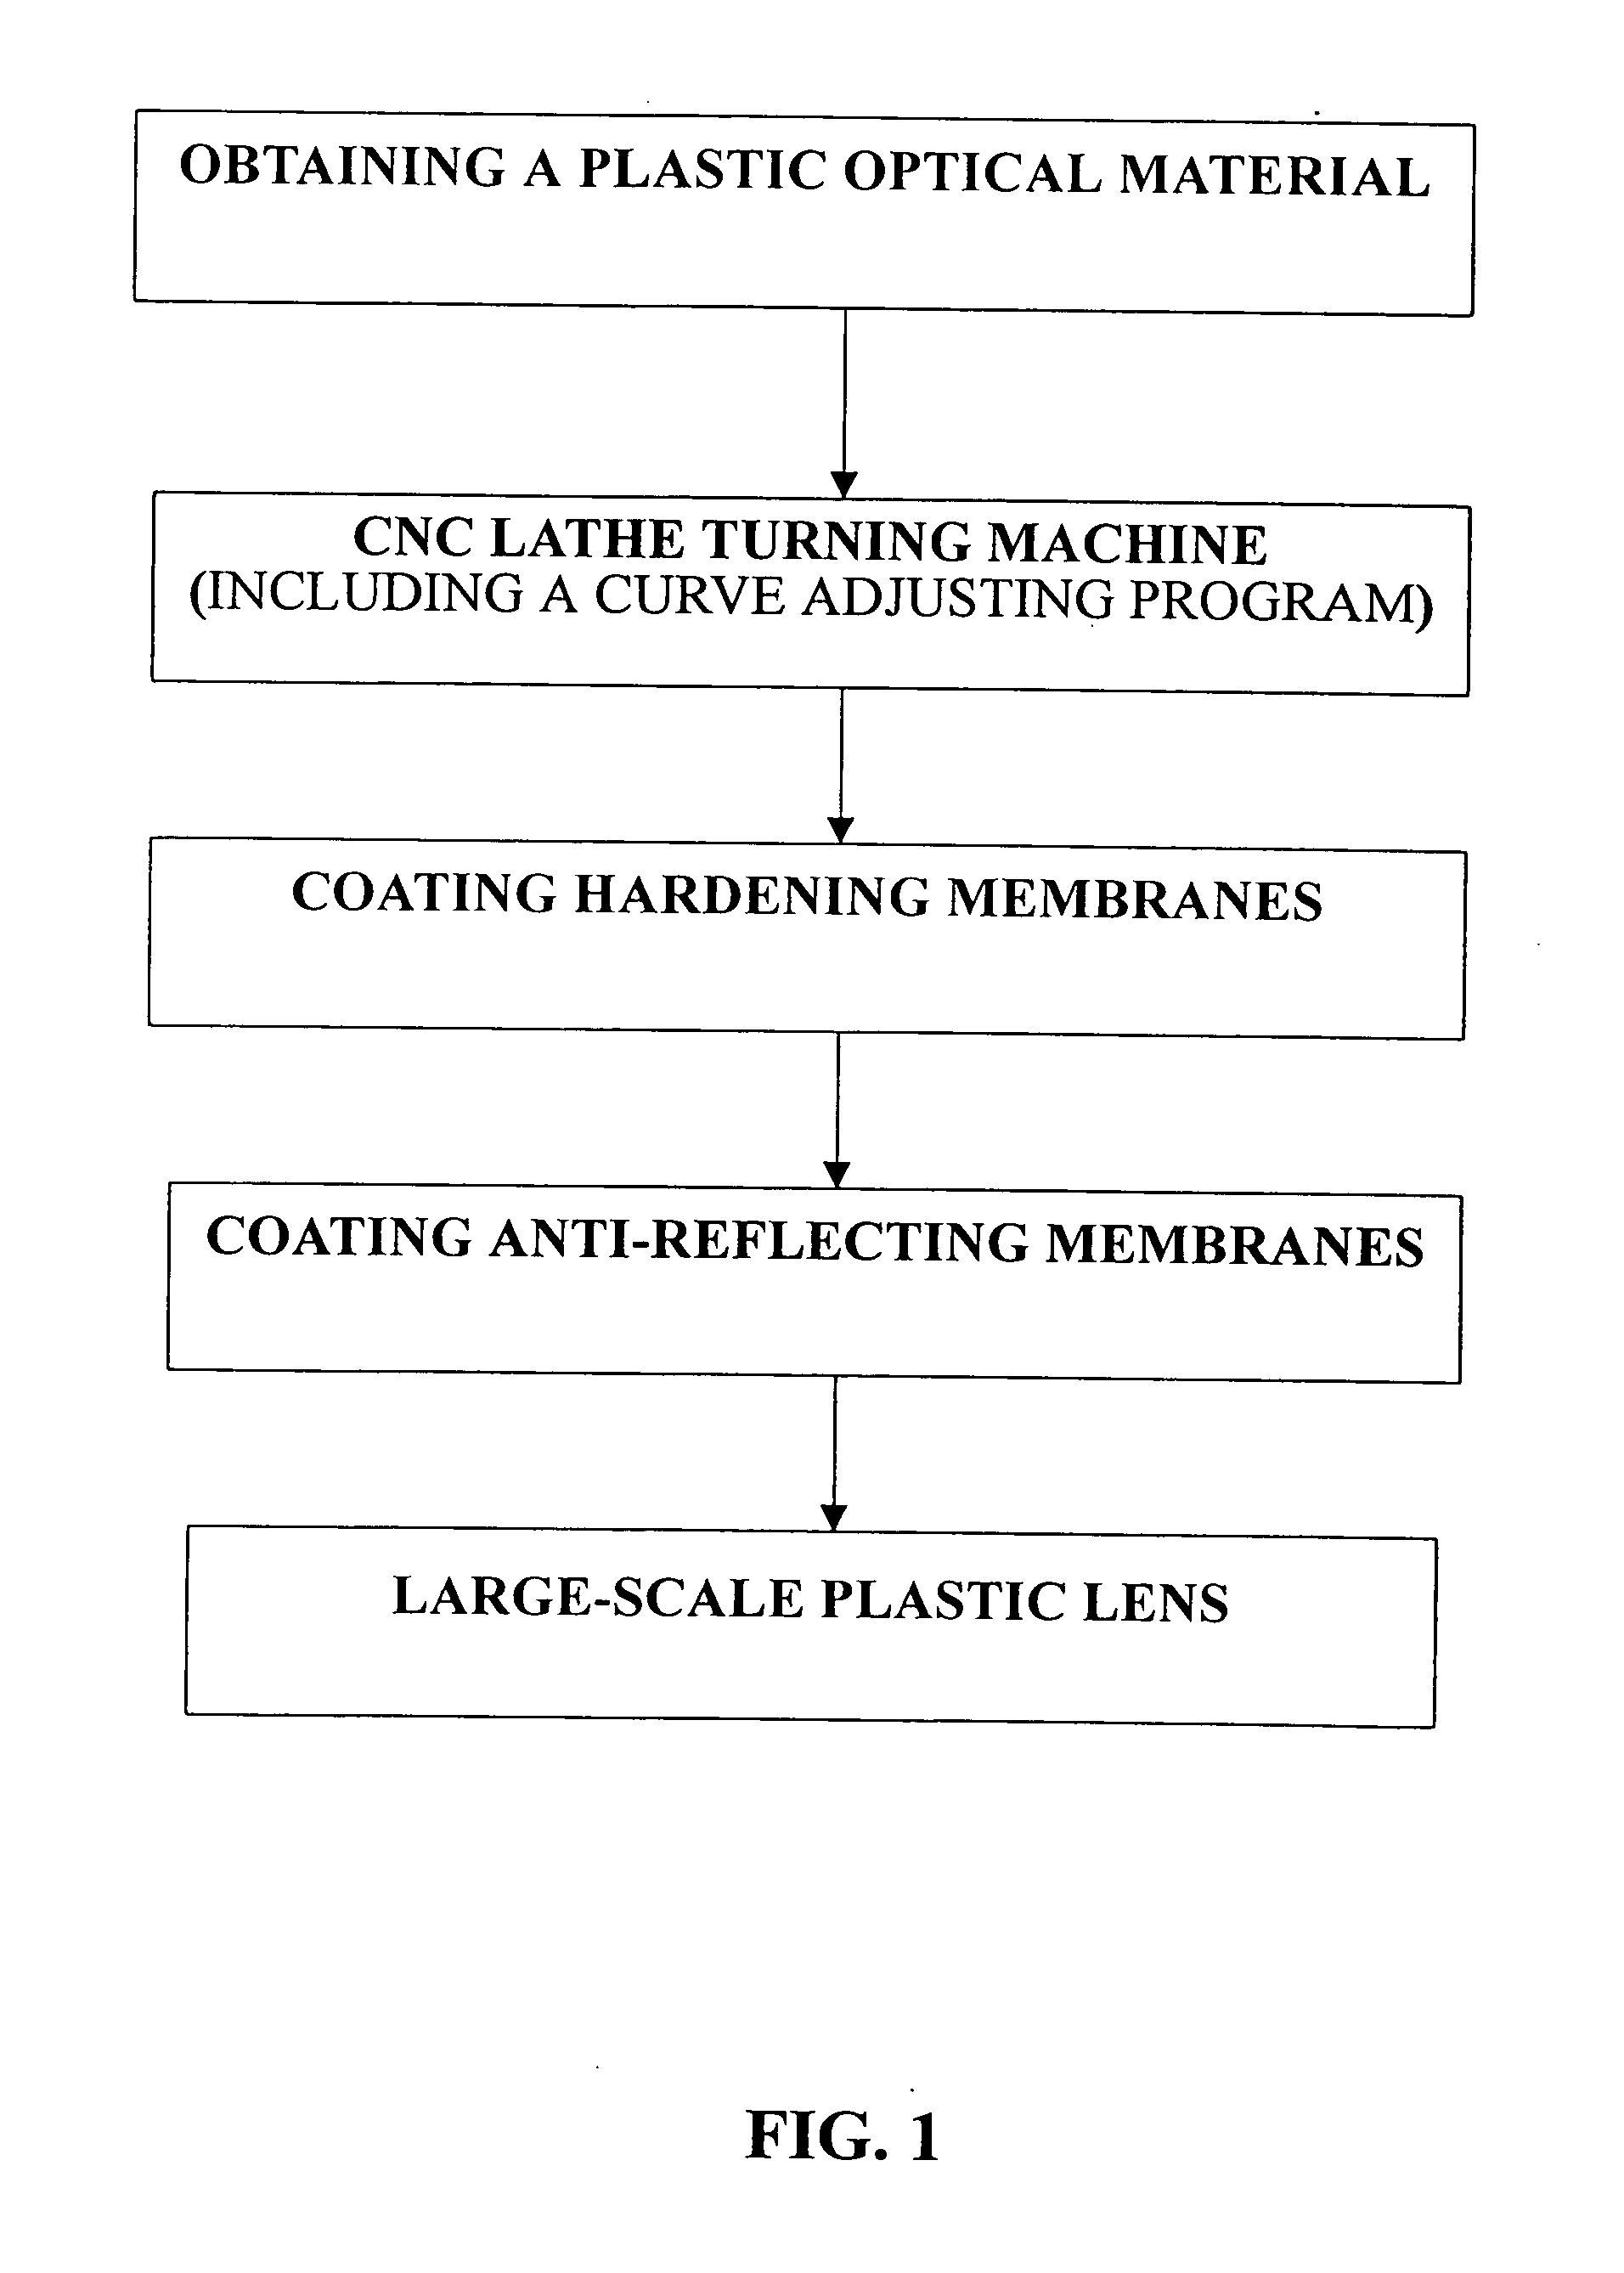 Methods for manufacturing large-scale plastic lenses